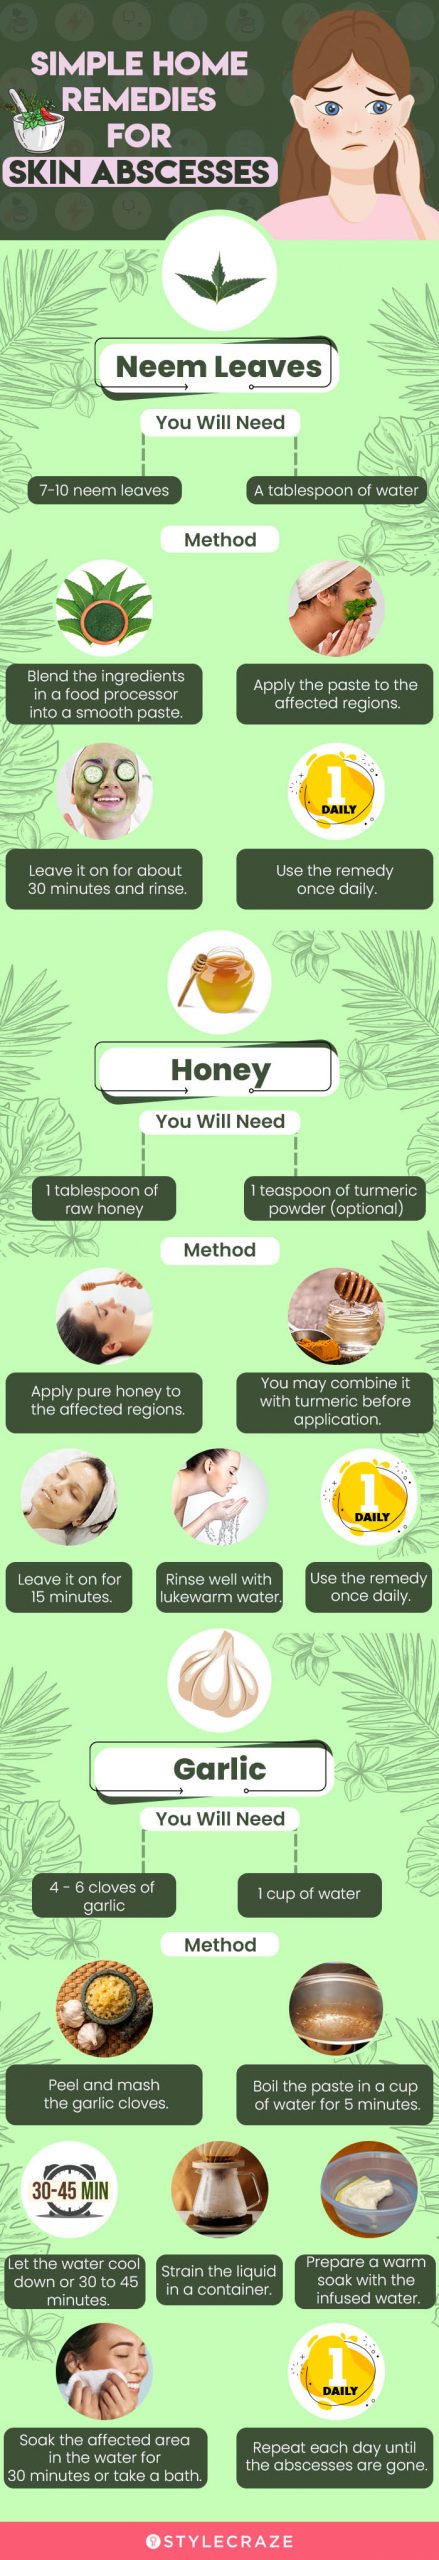 simple home remedies for skin abscesses [infographic]